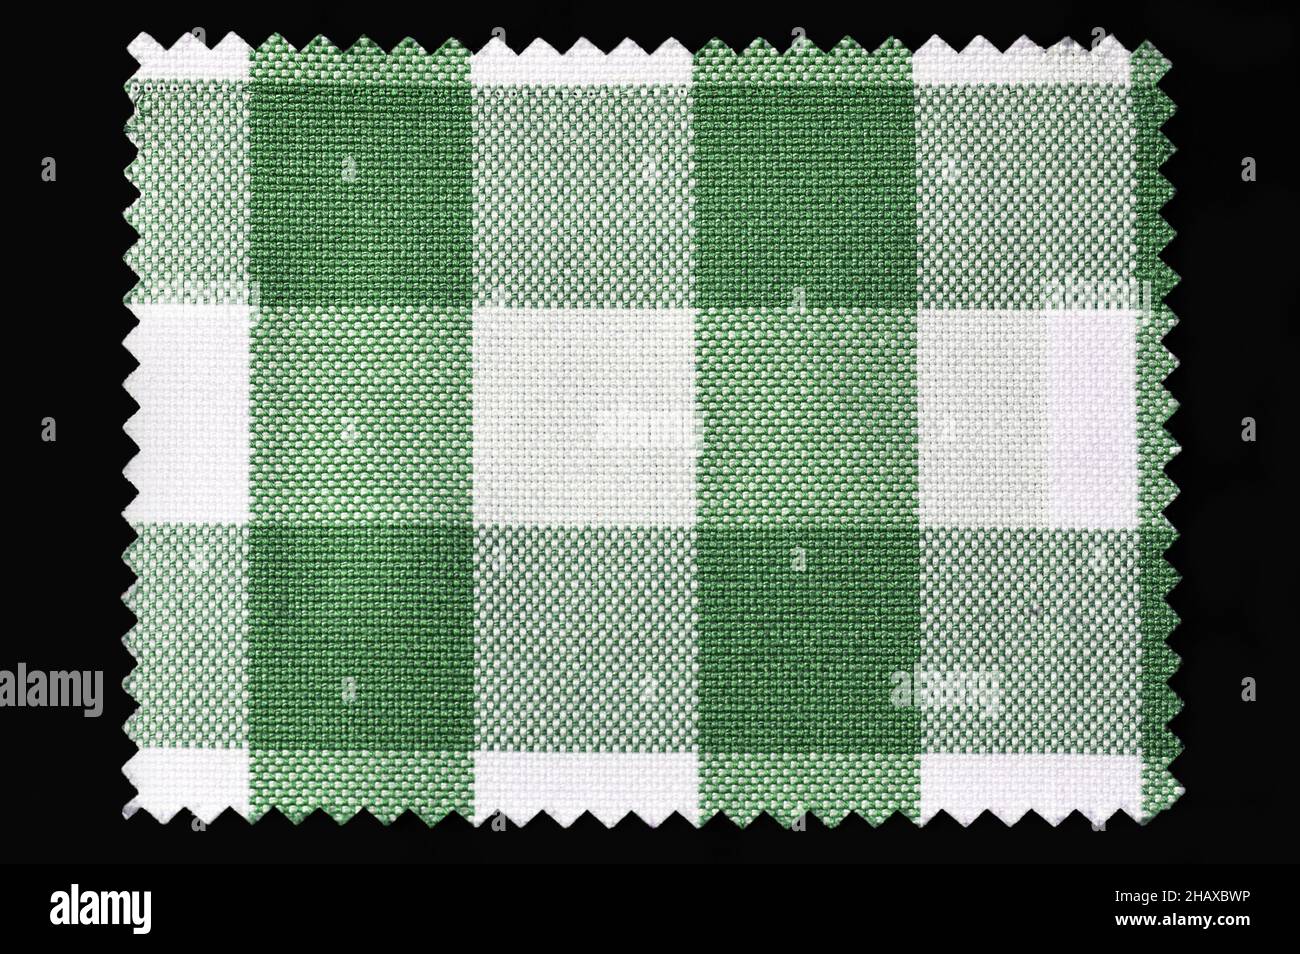 Green and white checkered fabric sample isolated on black background Stock Photo